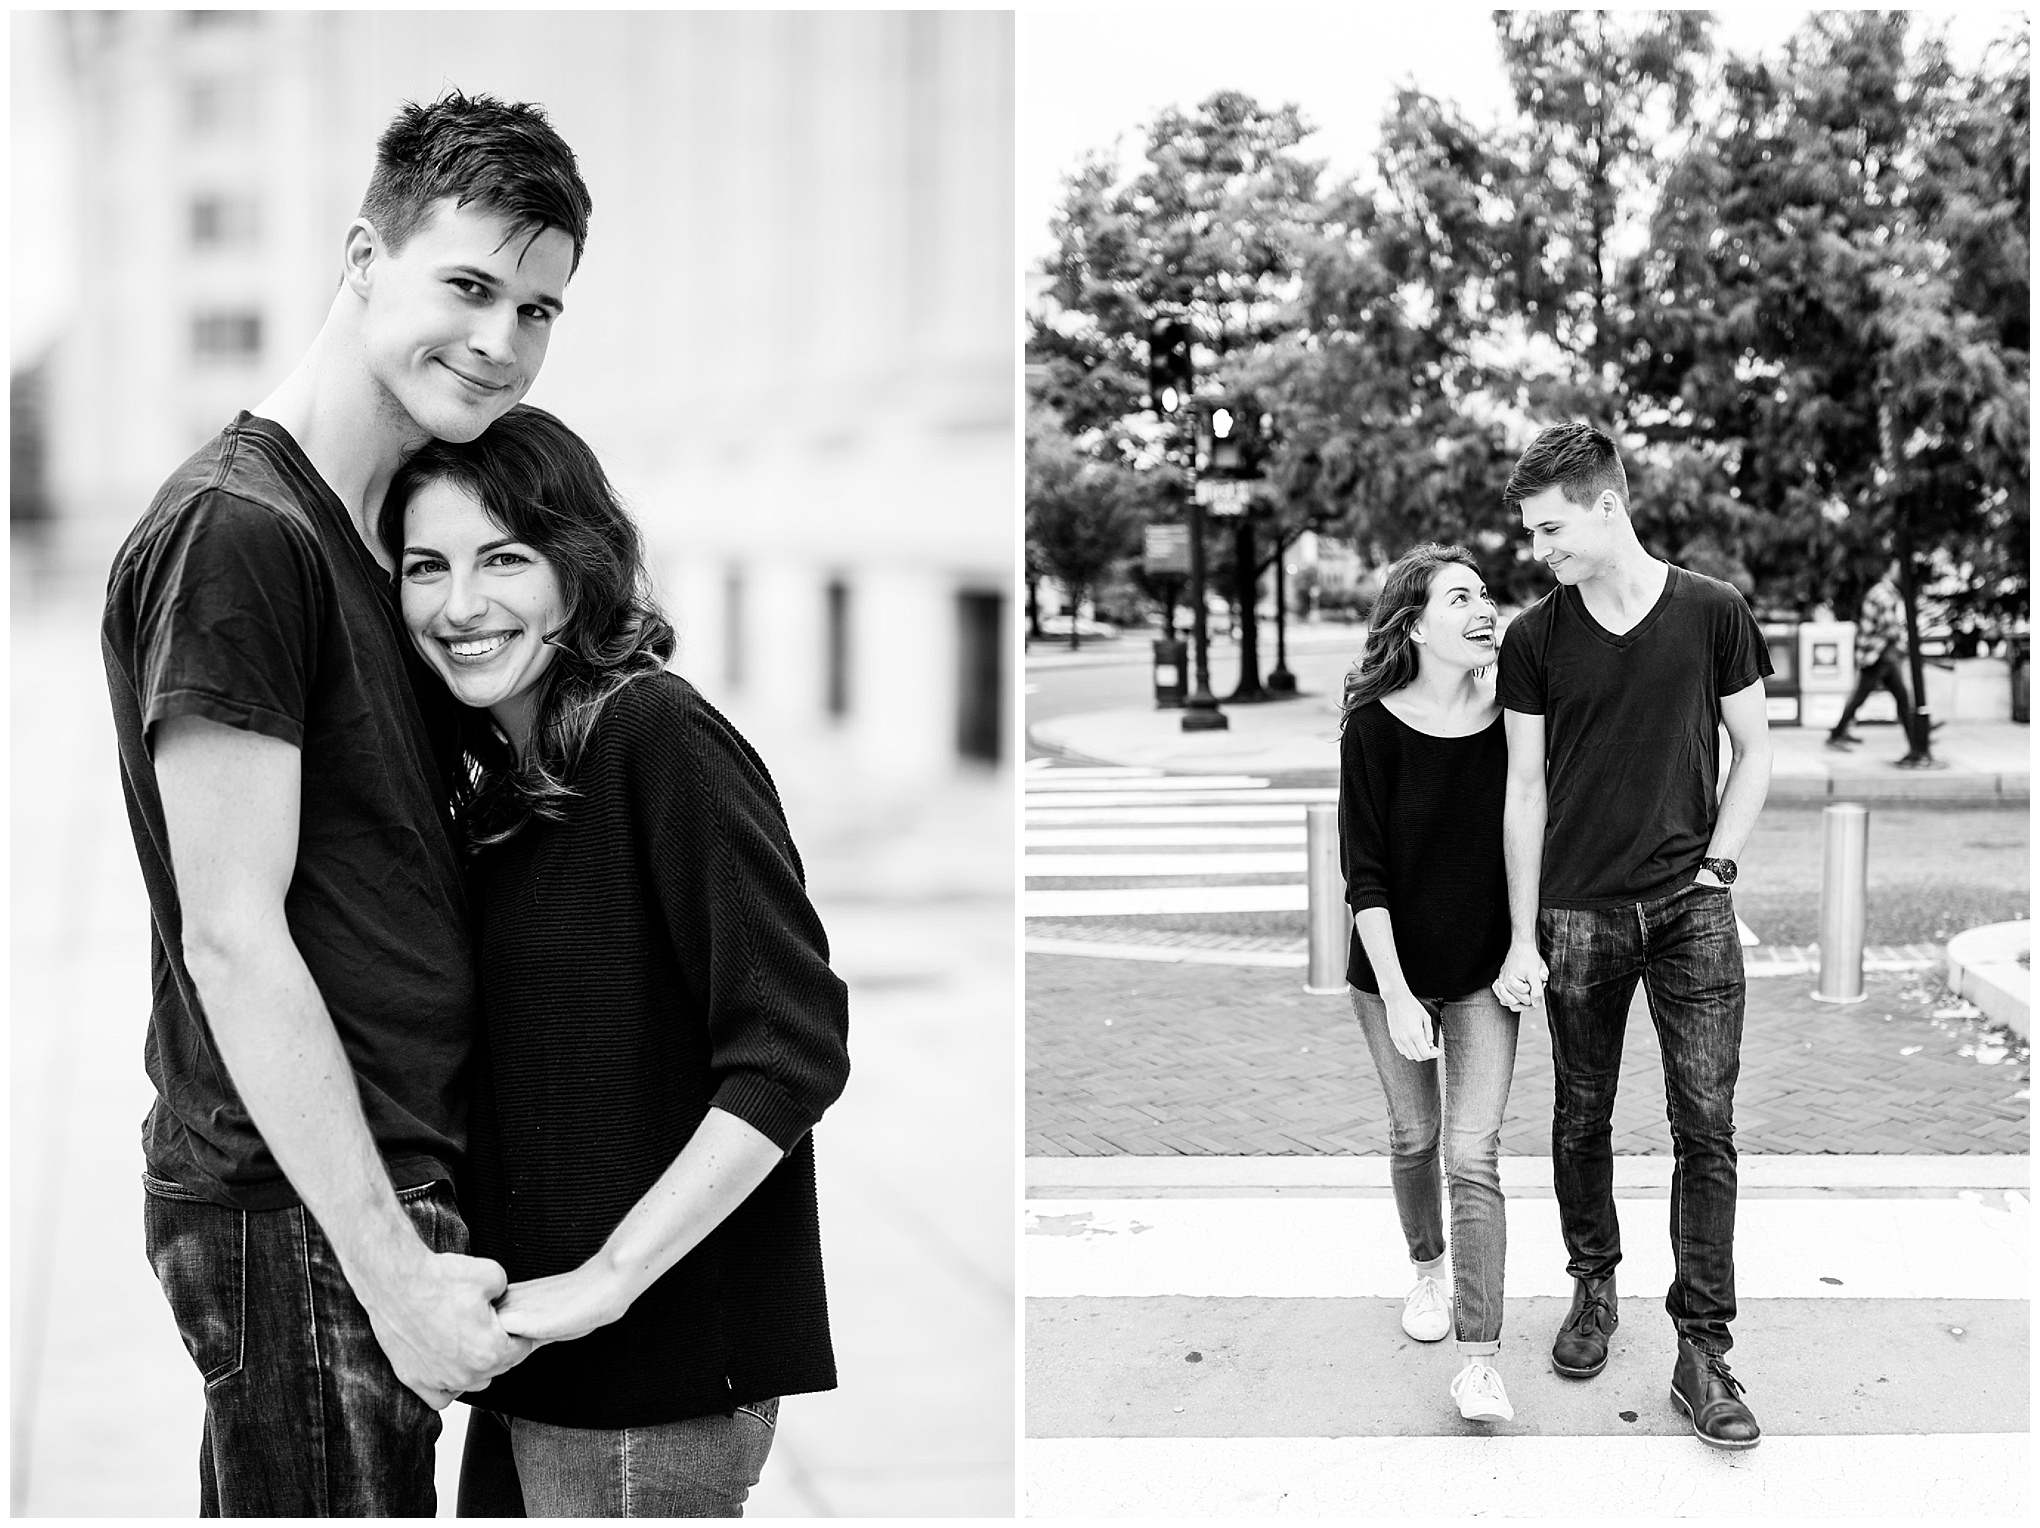 black and white engagement photos, black and white photography, black and white photos, engagement photos, black and white D.C., D.C. engagement photos, classic engagement photos, traditional engagement photos, engagement photos poses, classic architecture, D.C. architecture, Union Station D.C., Union Station, engaged couple, relationship goals, joyful couple, black and white sessions, couple in crosswalk